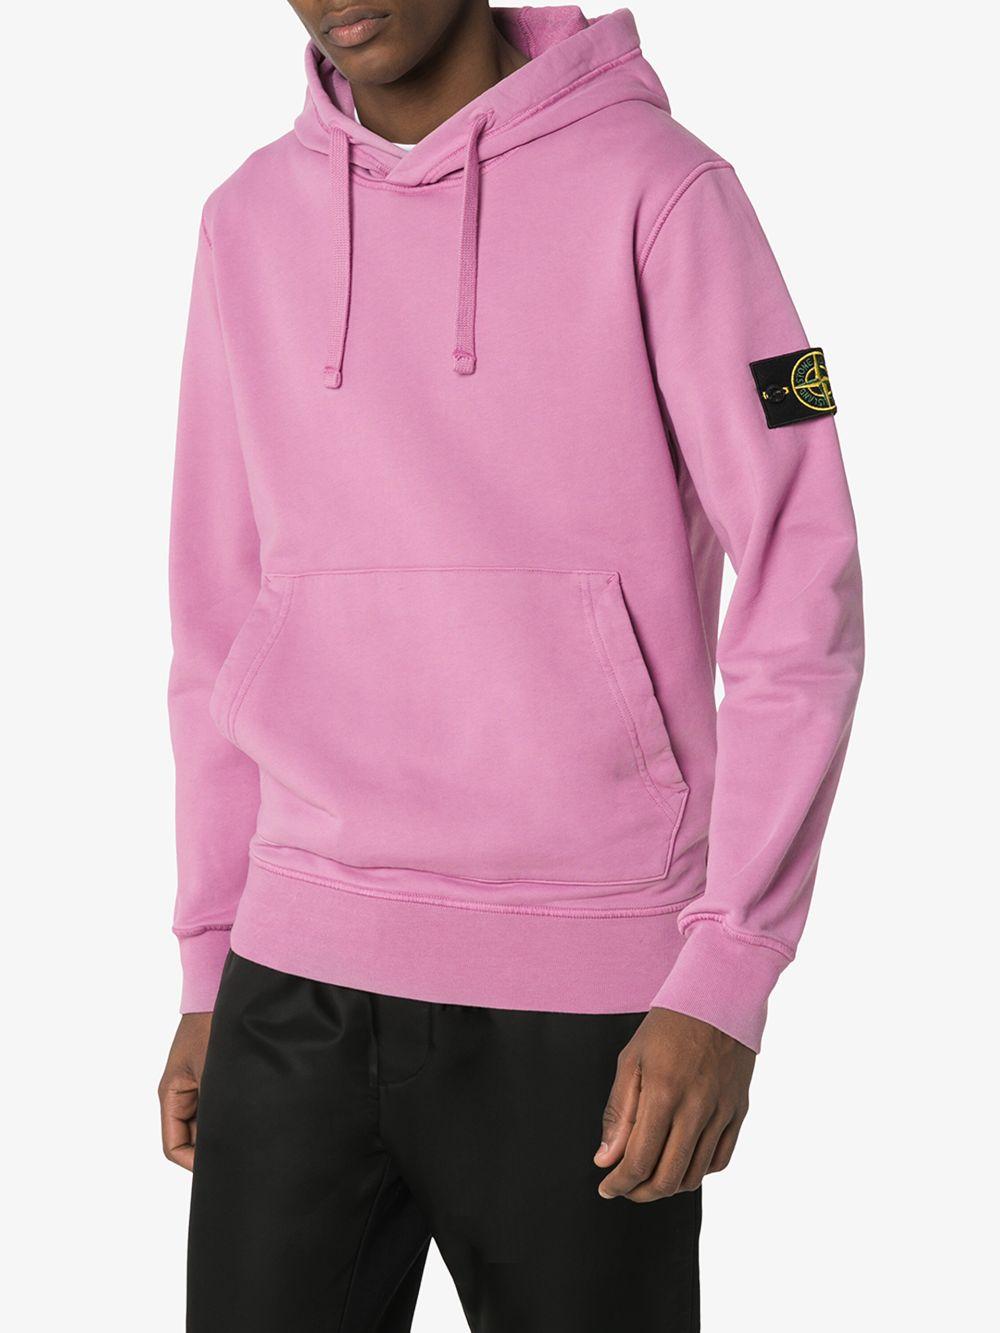 Mens Pink Stone Island Jumper Hot Sale, SAVE 40% - aveclumiere.com